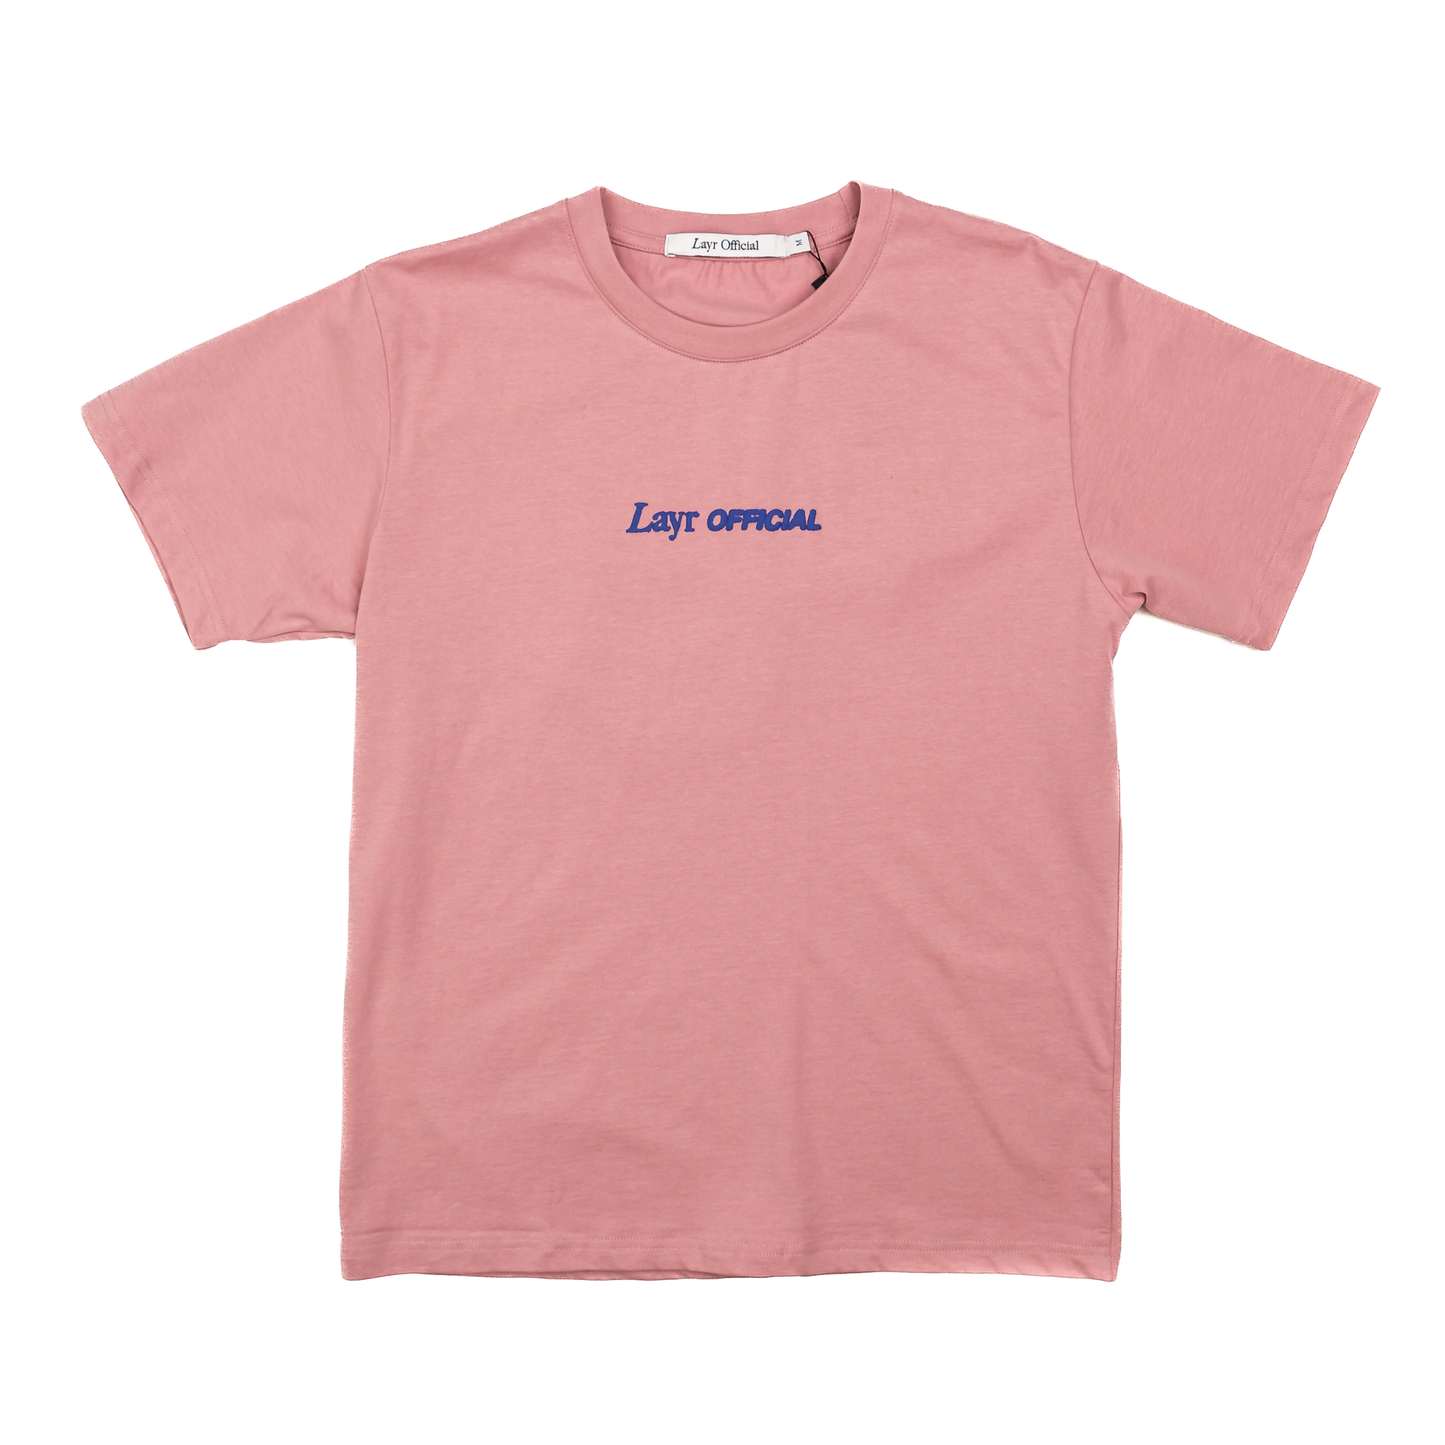 New LO Tee, Washed Pink - Layr Official